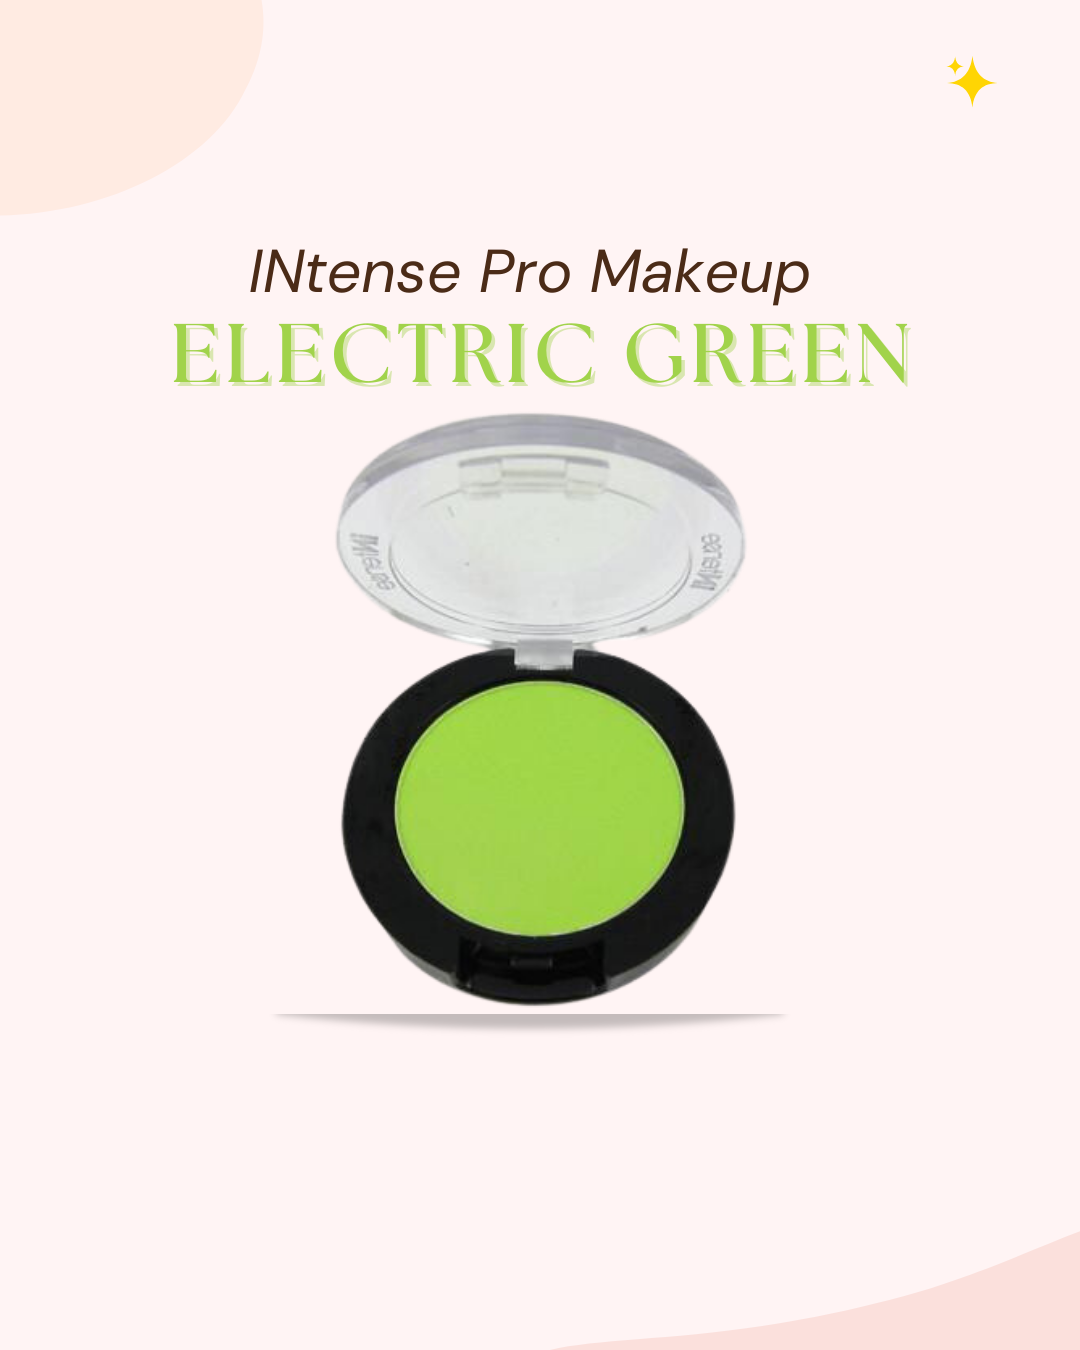 INtense Pro Makeup Hyper-saturated Pigments